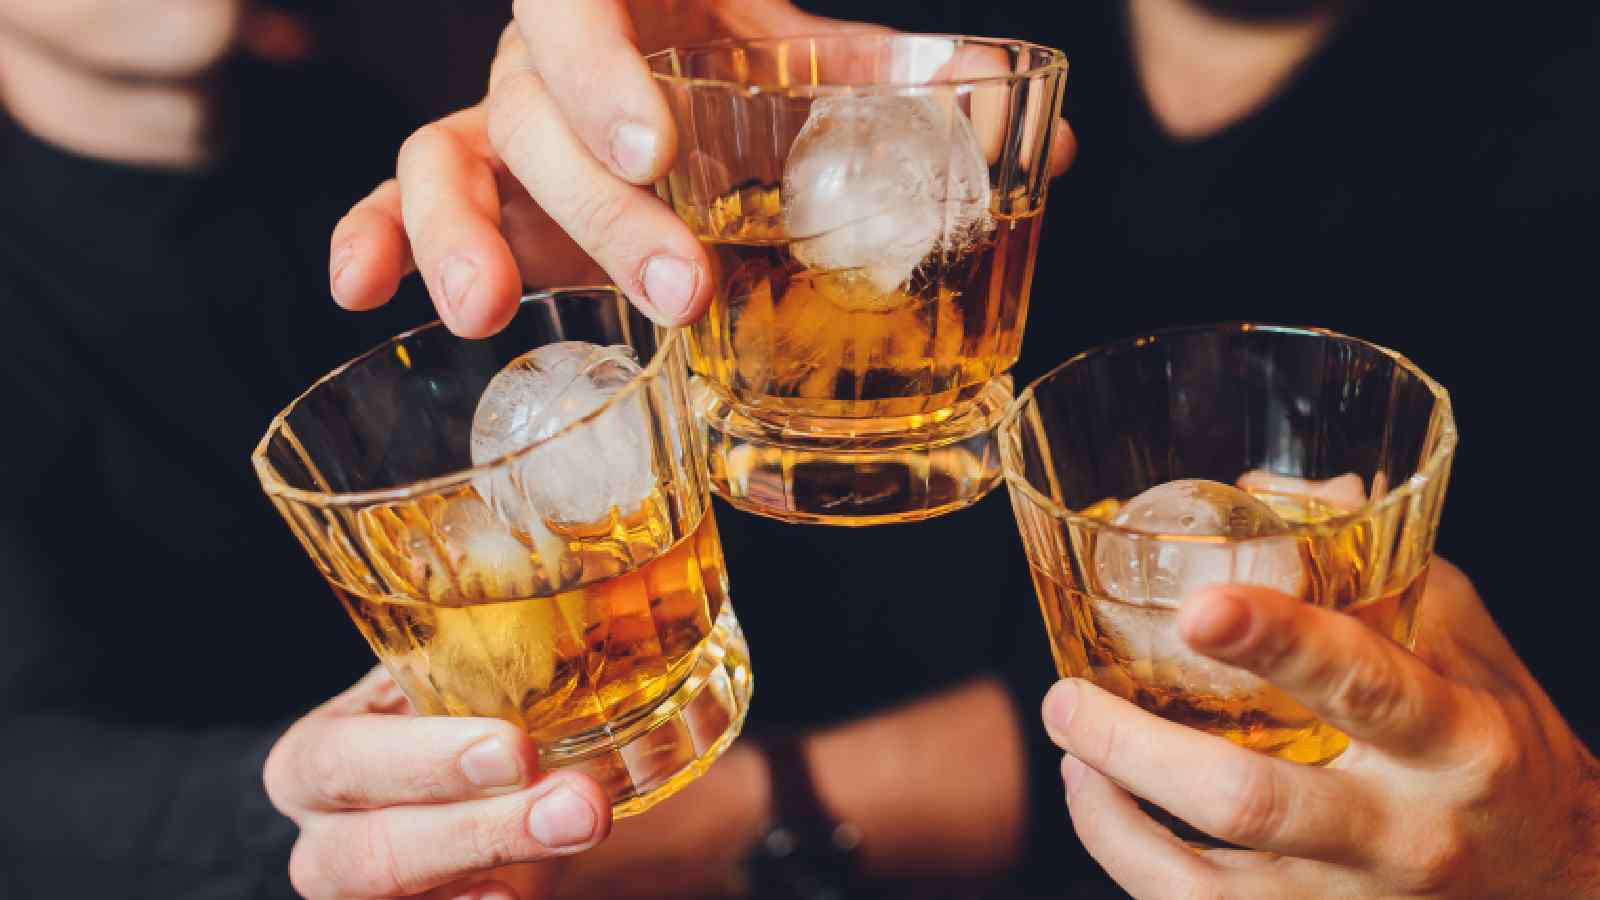 Side effects of alcohol: Here’s how to increase the risk of Covid-19